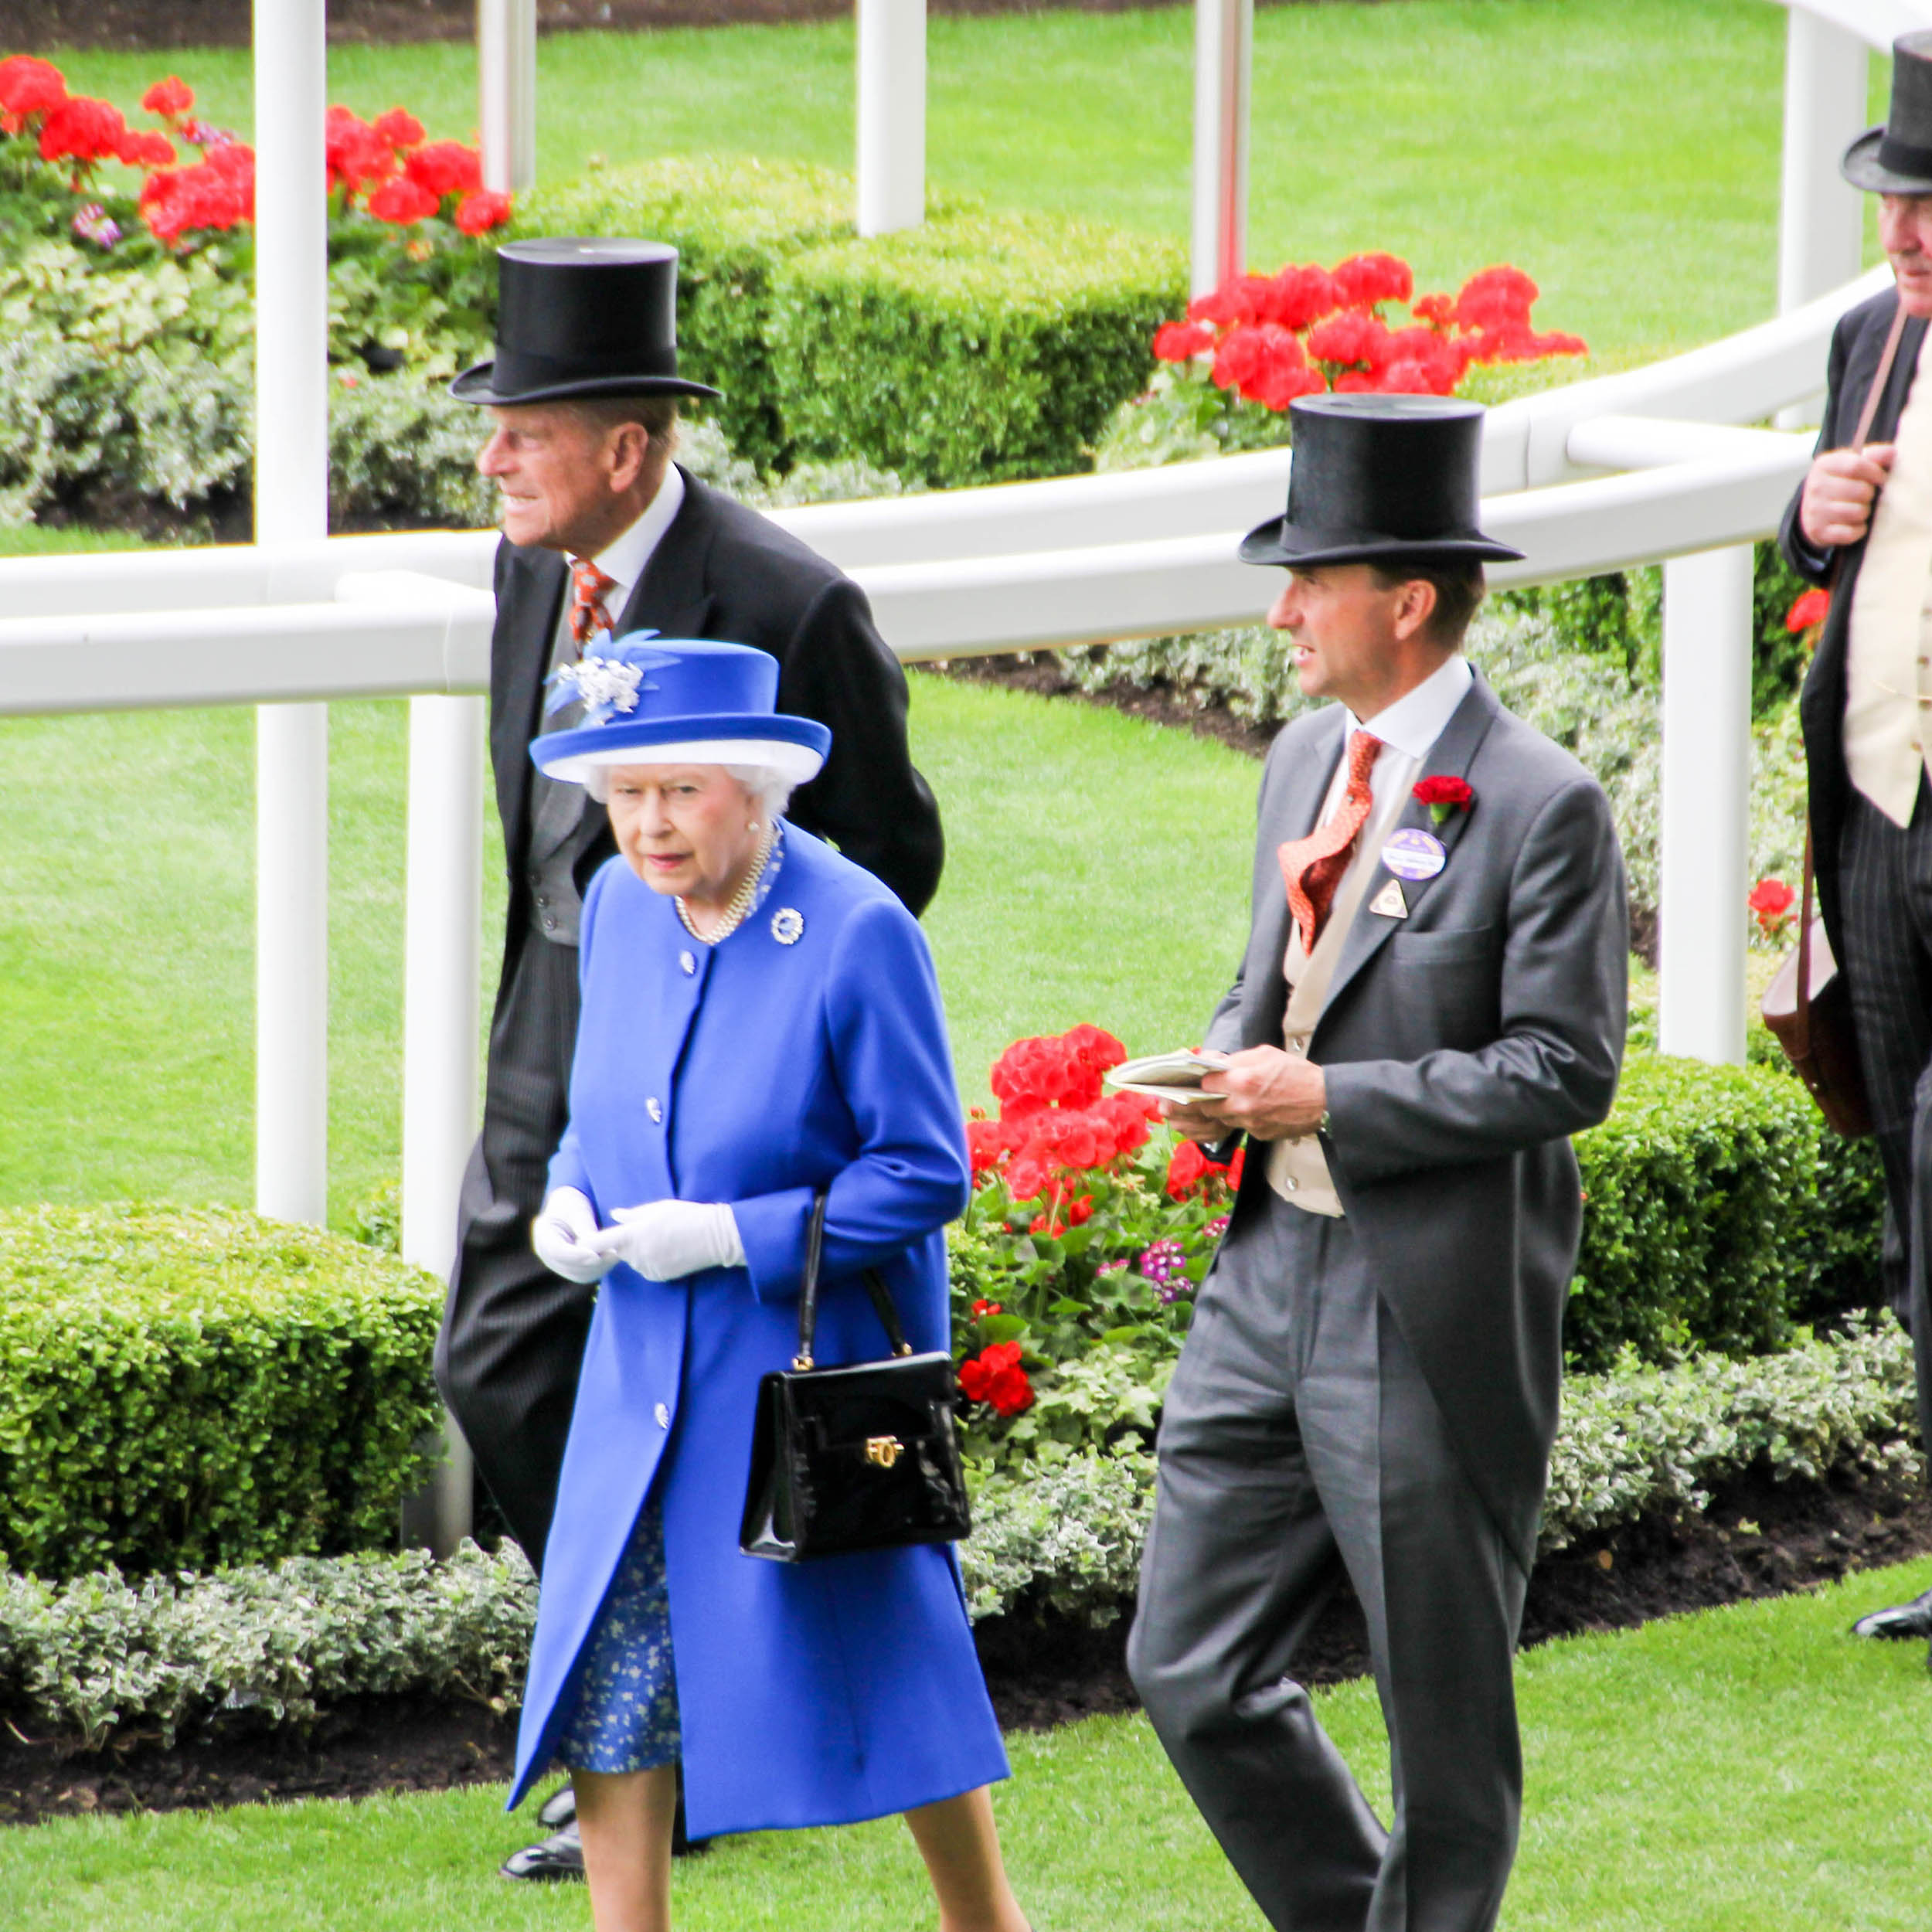 THE QUEEN’S 90TH BIRTHDAY AND HER FAVOURITE JEWELS, THE ROYAL ASCOT